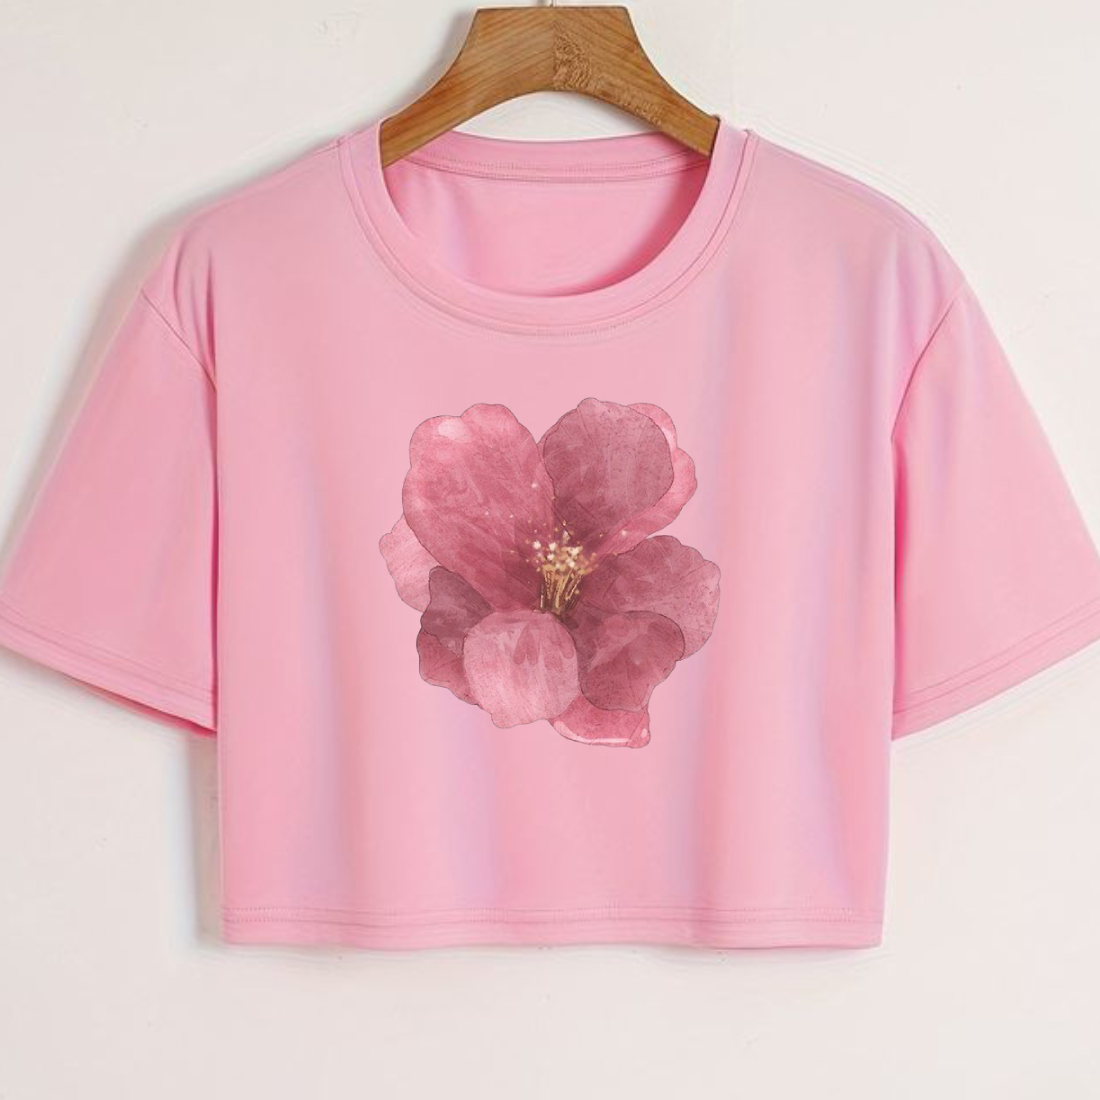 "Floral Elegance: Blossoming in Baby Pink and Black" preview image.